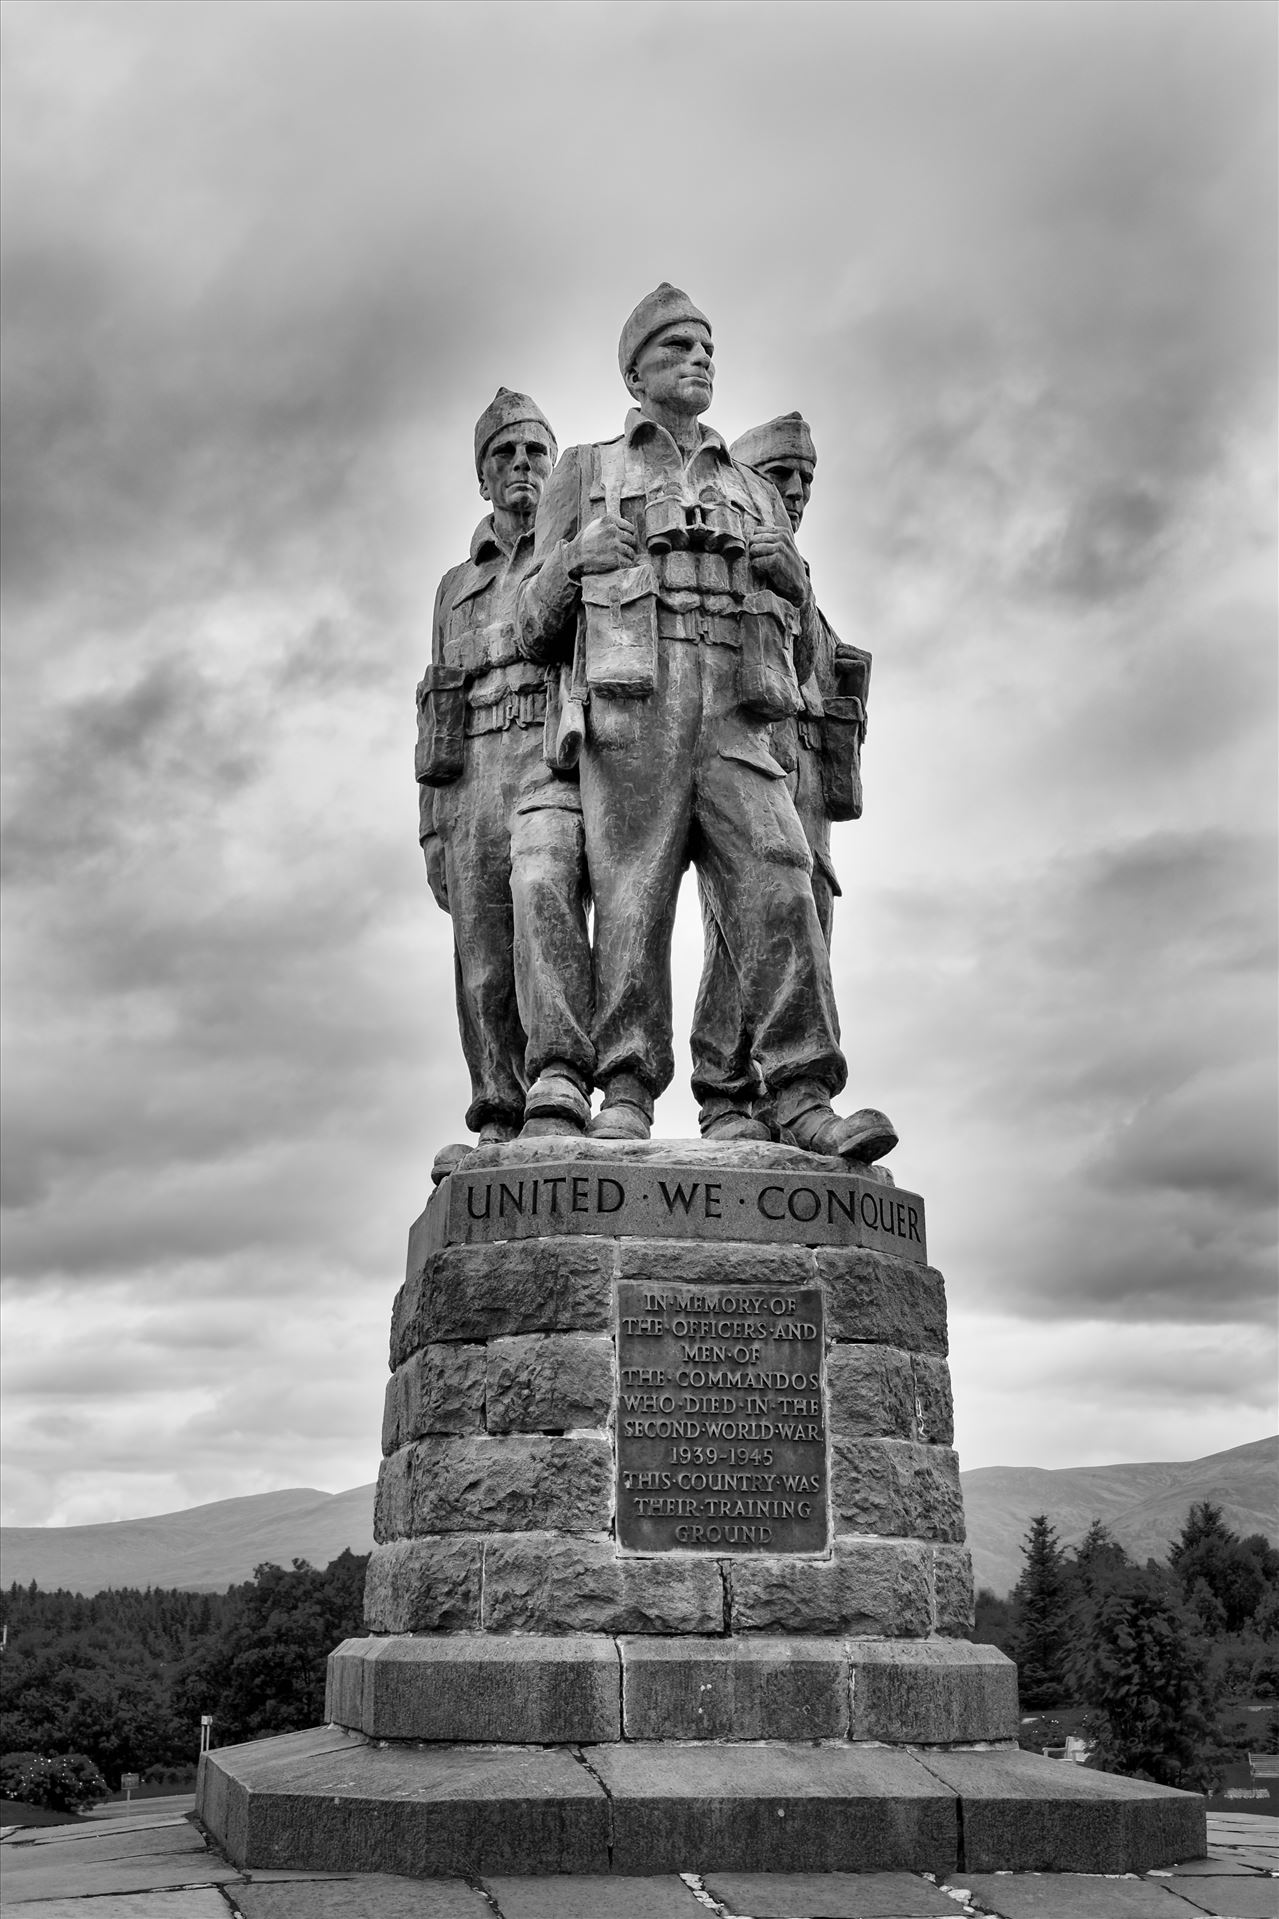 Commando memorial - The Commando Memorial is a Category A listed monument in Scotland, dedicated to the men of the original British Commando Forces raised during World War II. Situated around a mile from Spean Bridge village by philreay